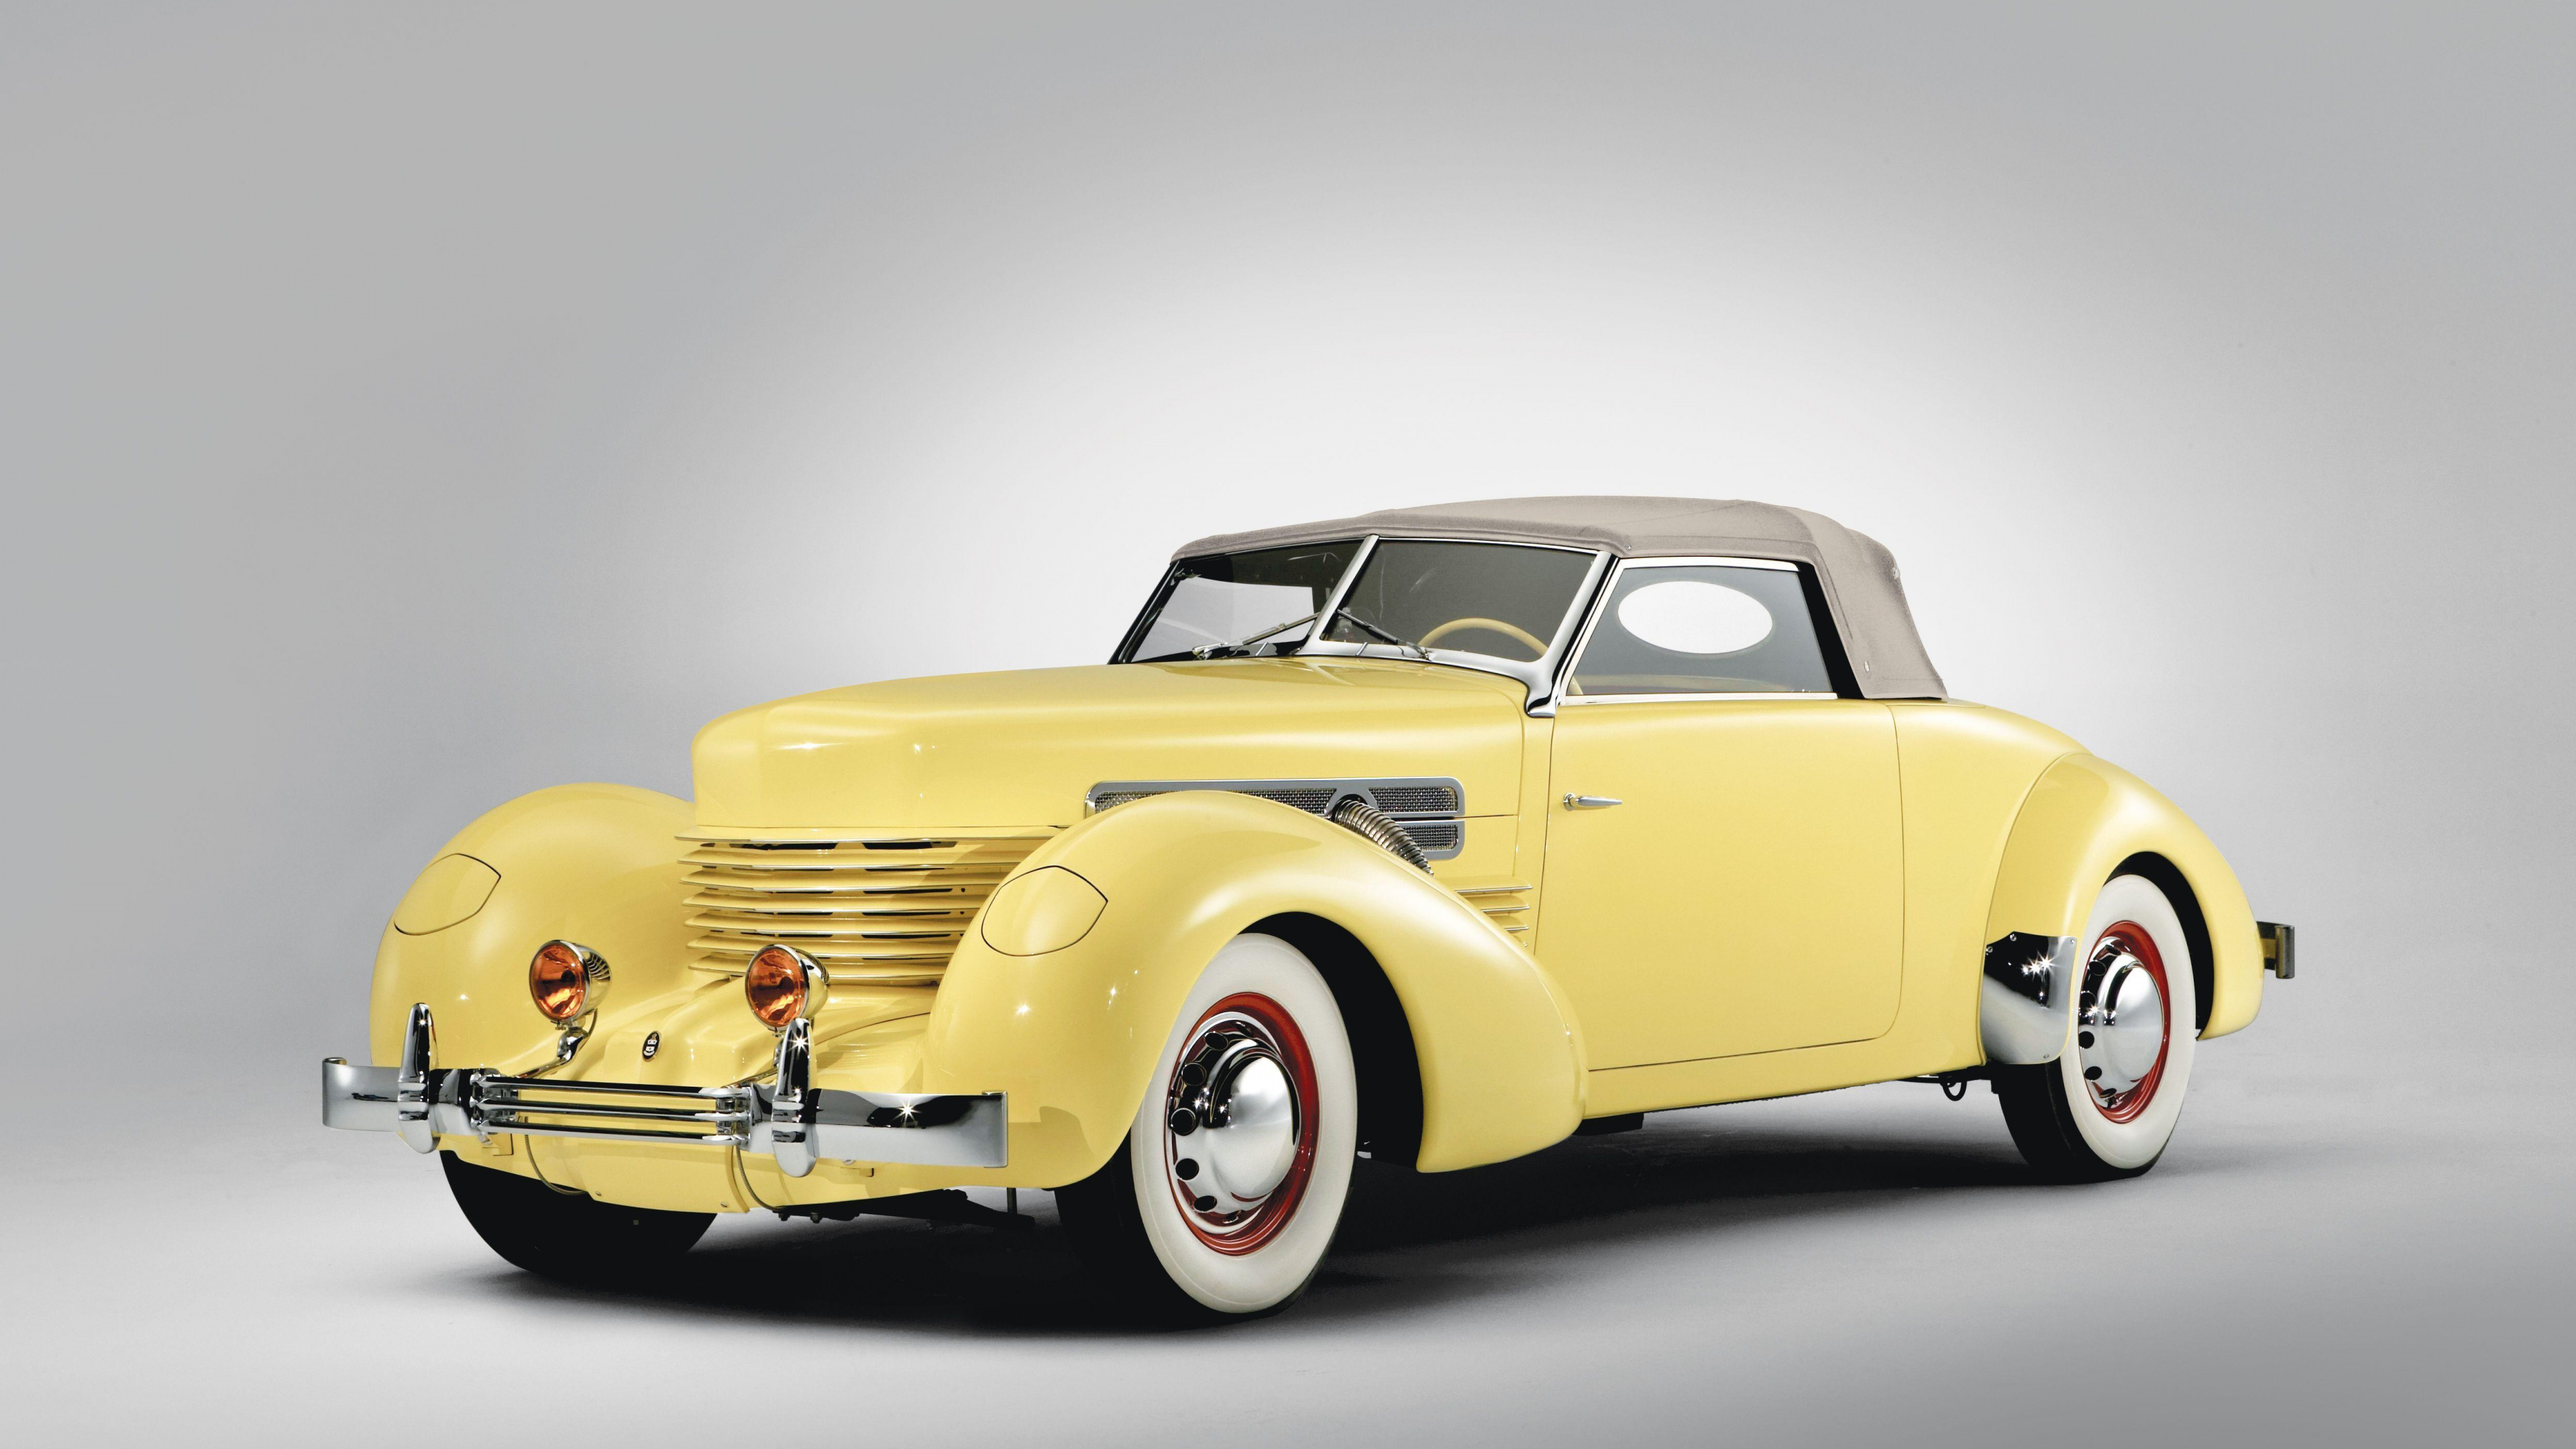 Yellow Vintage Car on White Background. Wallpaper in 3840x2160 Resolution